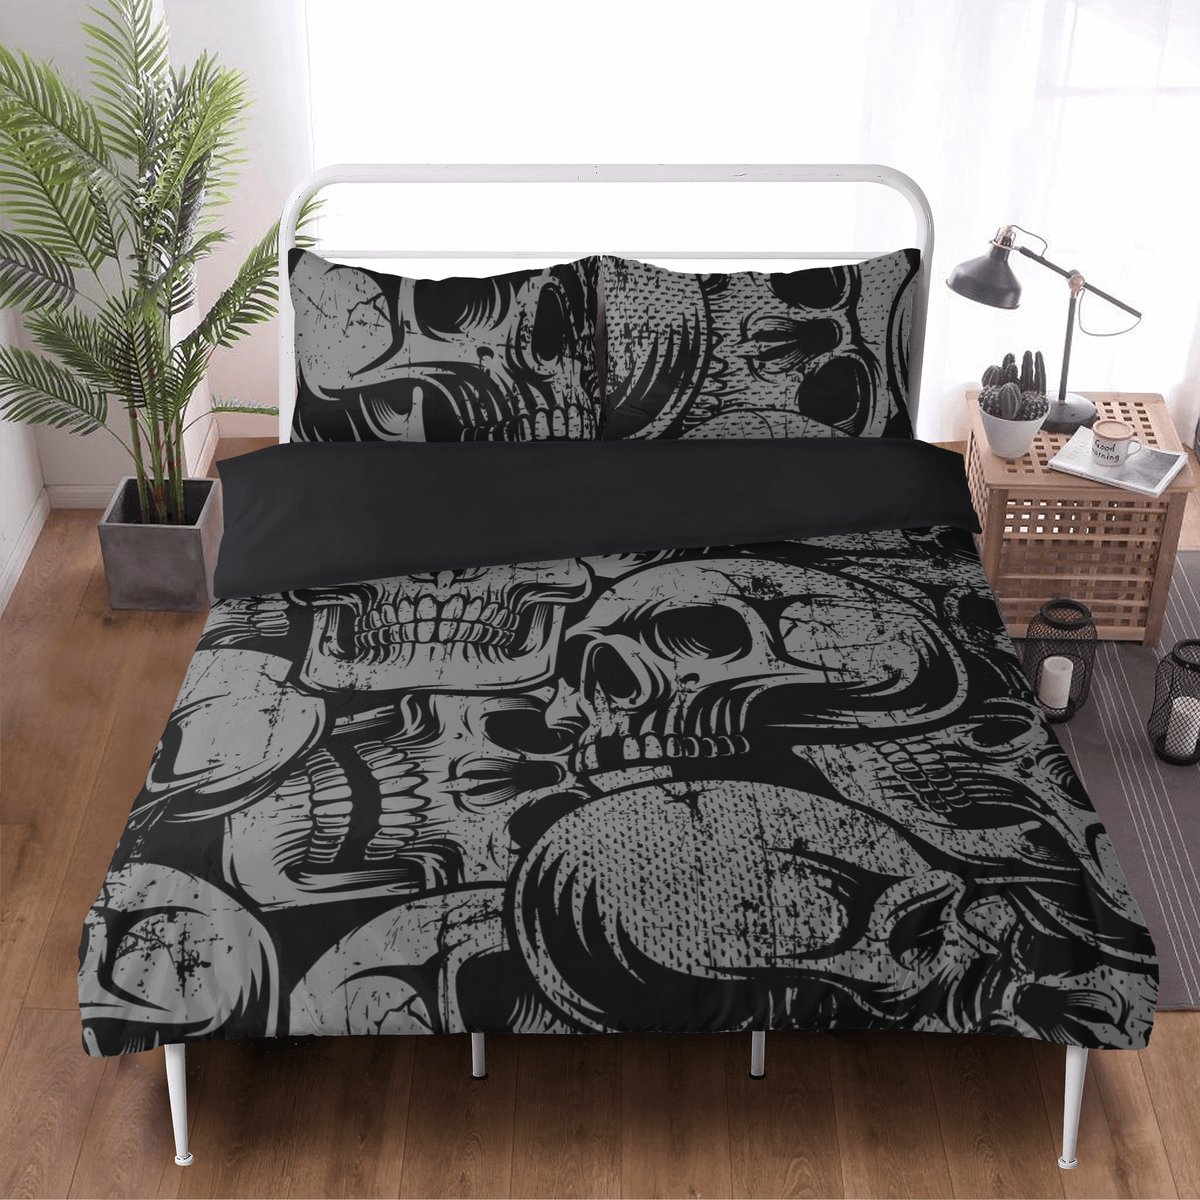 💀Silver Skull 3 Pcs Beddings💀
🔥grimhavenclothing.com/products/silve… 
#bedding #bedsheets #bedroomdecor #decor #homedecor #skull #skullhead #skullroom #skullbedding #skulldecor #skullstyle #skulllover #goth #gothskull #gothbedding #gothdecor #gothic #gothicskull #gothicbedding #gothicdecor